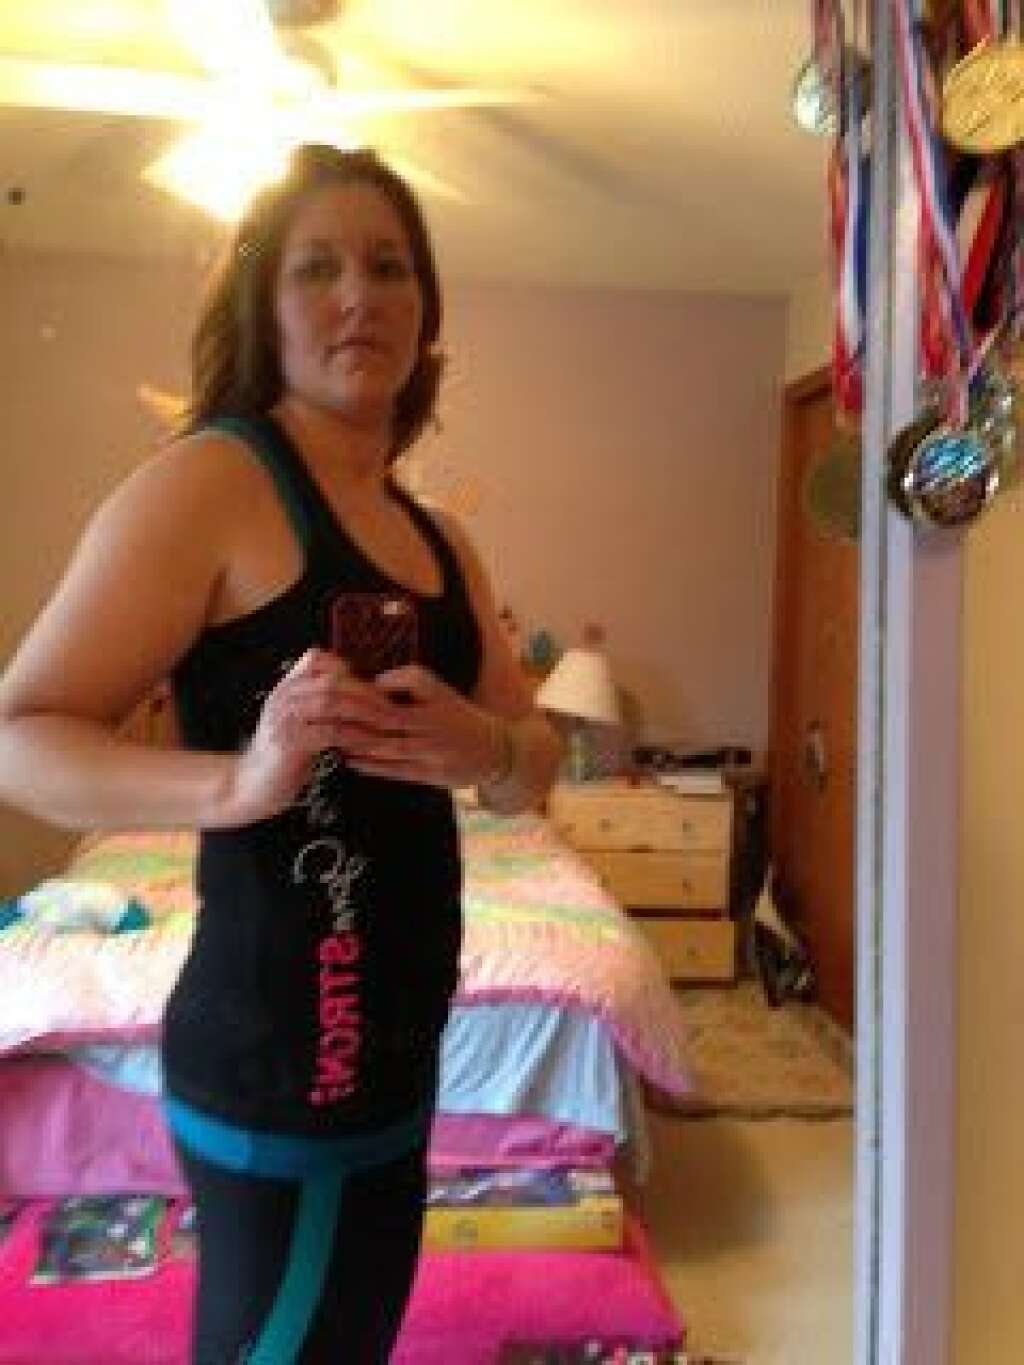 Jessica AFTER - <a href="http://www.huffingtonpost.com/2013/02/22/i-lost-weight-jessica-williams_n_2662812.html">Read Jessica's story here.</a>